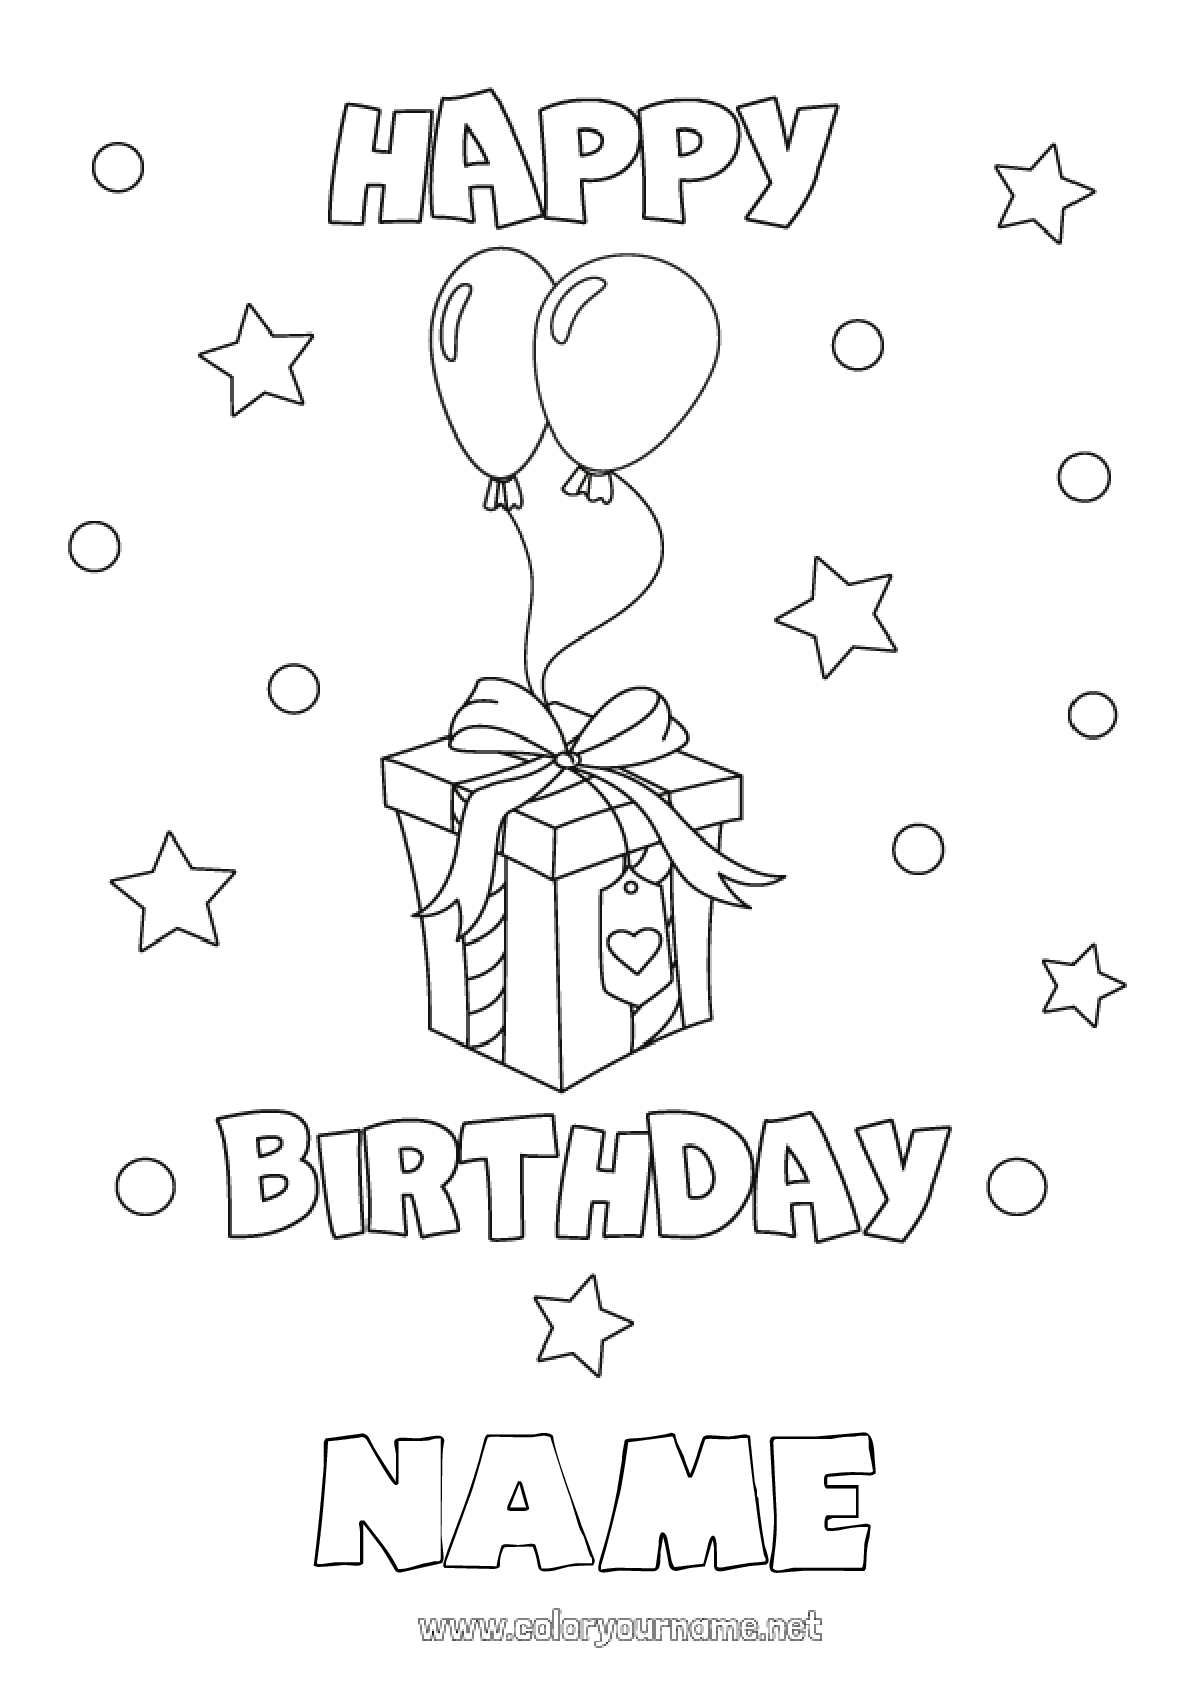 Coloring page No.175 - Sweets Gifts Birthday